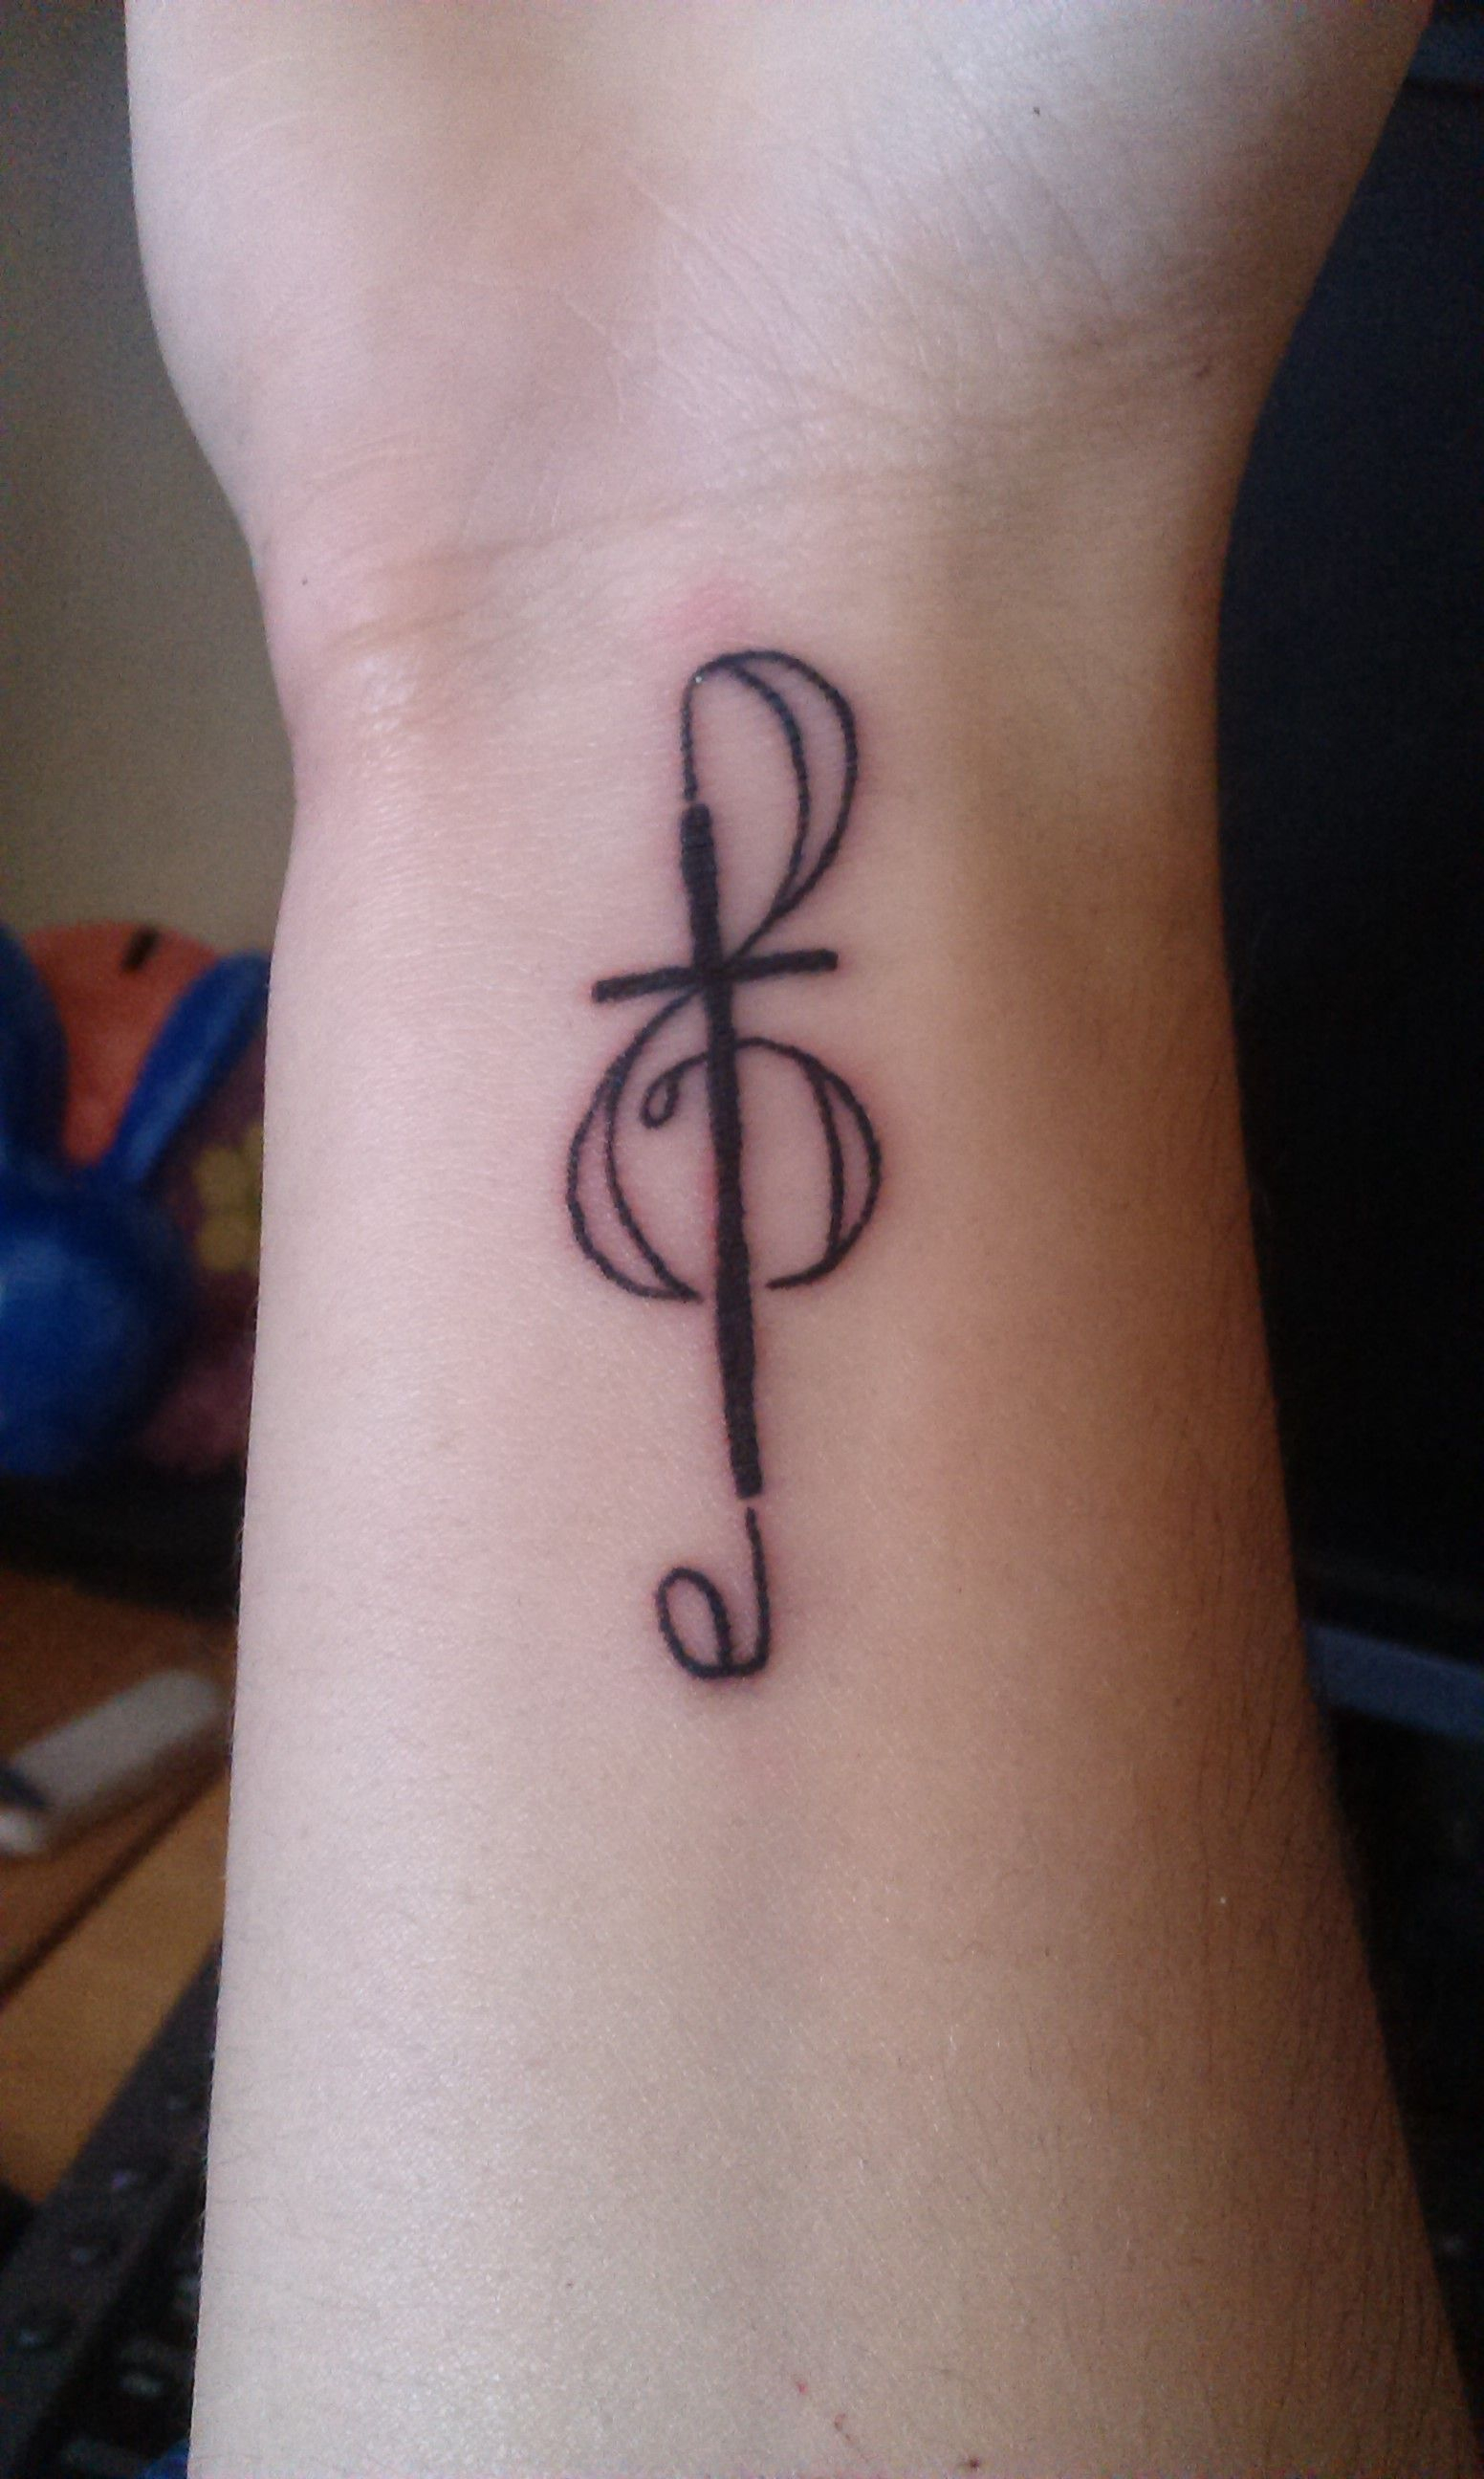 My Tattoo Mix Of A Music Note And A Cross To Represent Music And intended for dimensions 1552 X 2592